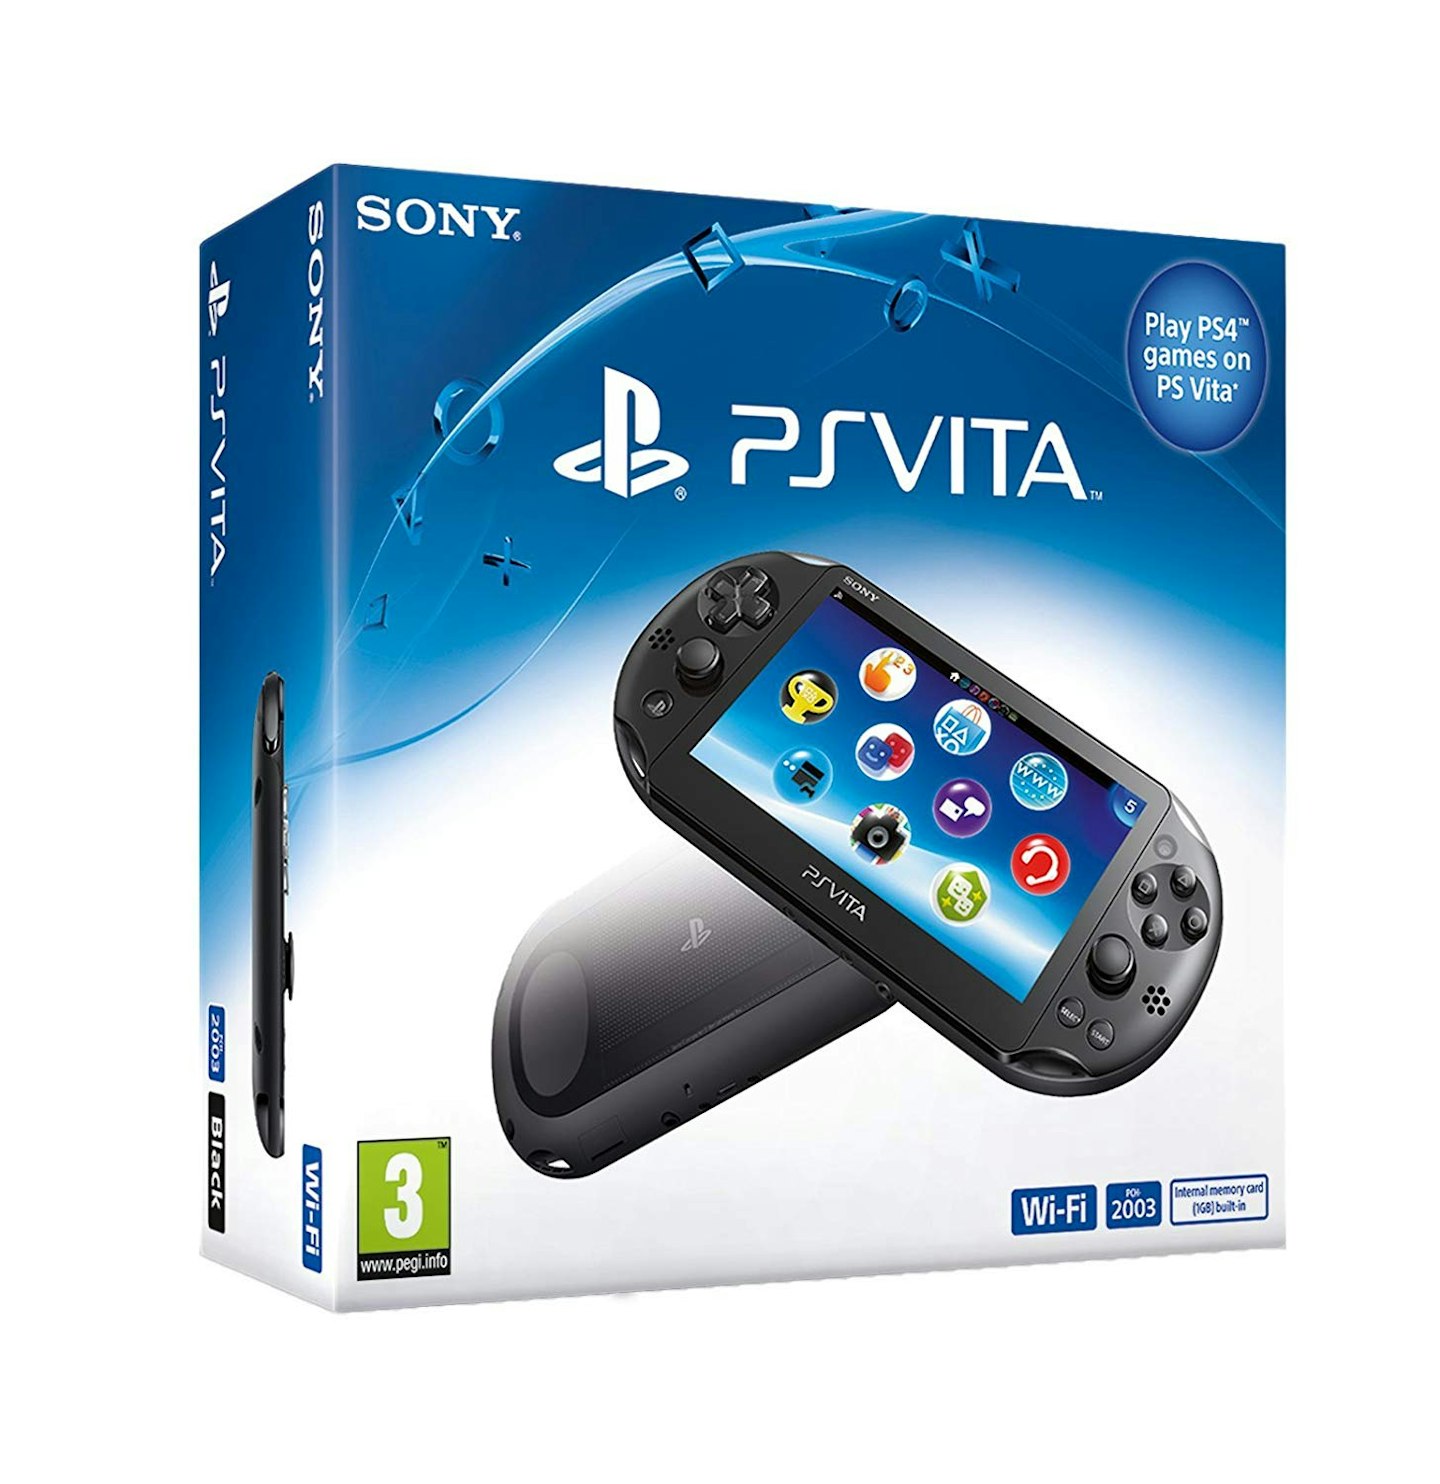 PlayStation Vita, from £93.99 (used)